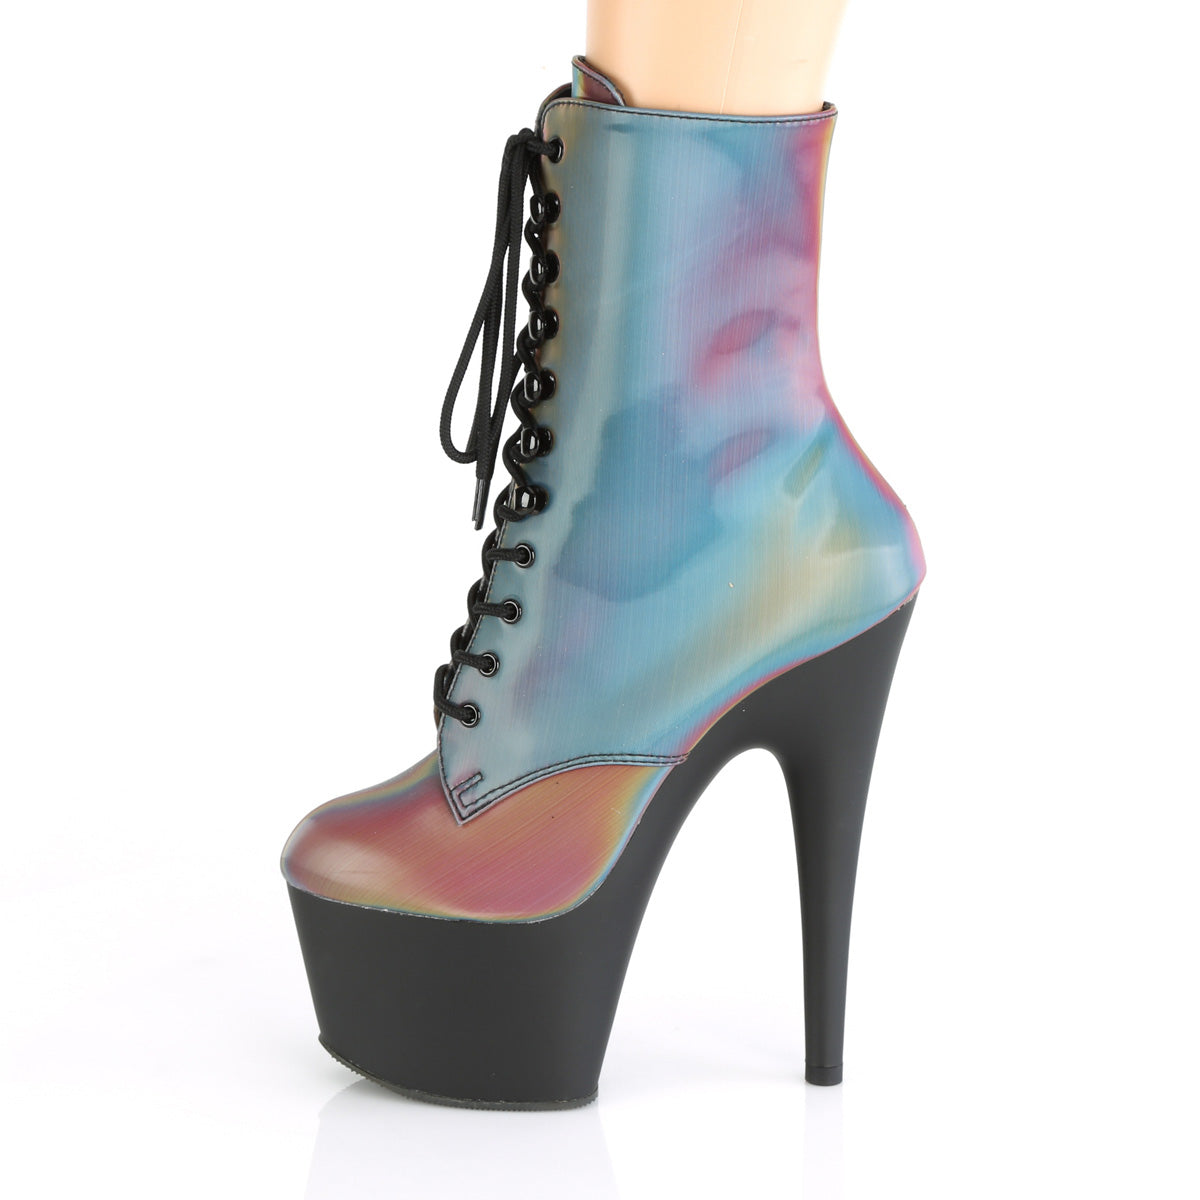 Pleaser Womens Ankle Boots ADORE-1020REFL Rainbow Reflective/Blk Matte